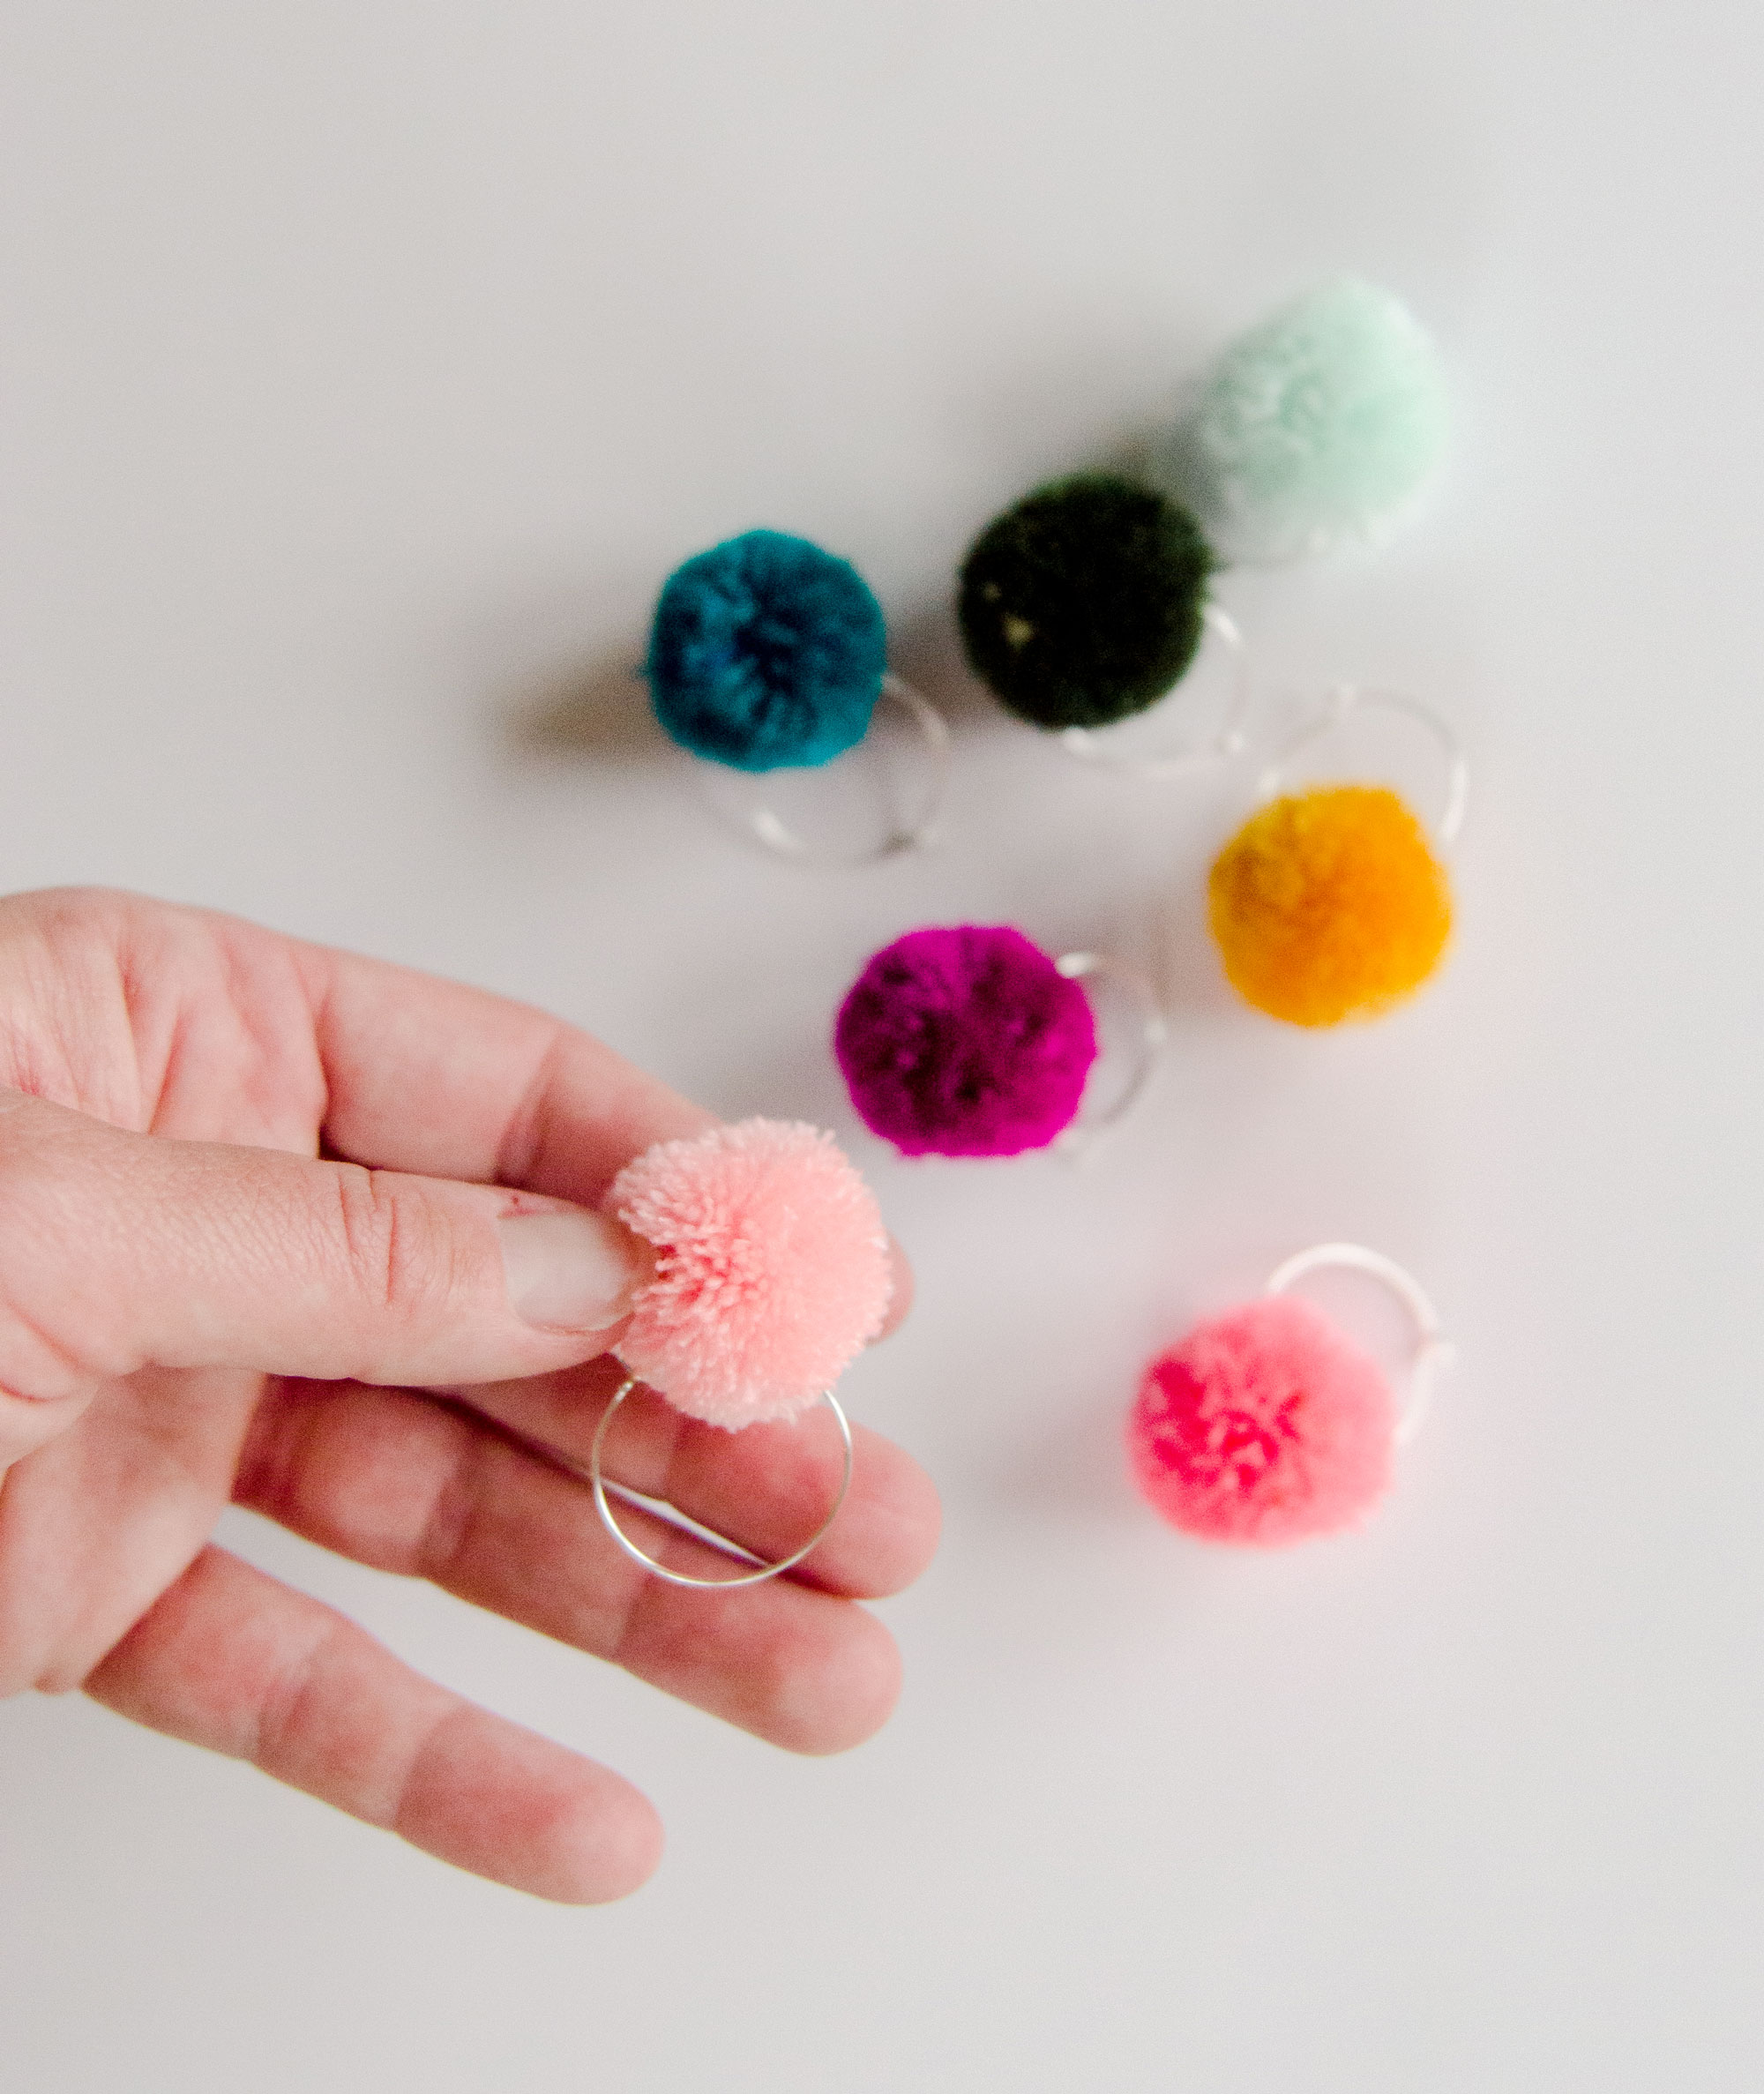 DIY Pom wine charms, Colorful wine charms, How to make the best pom pom, DIY pom poms, DIY wine charms, fast craft ideas, crafting ideas, party craft ideas